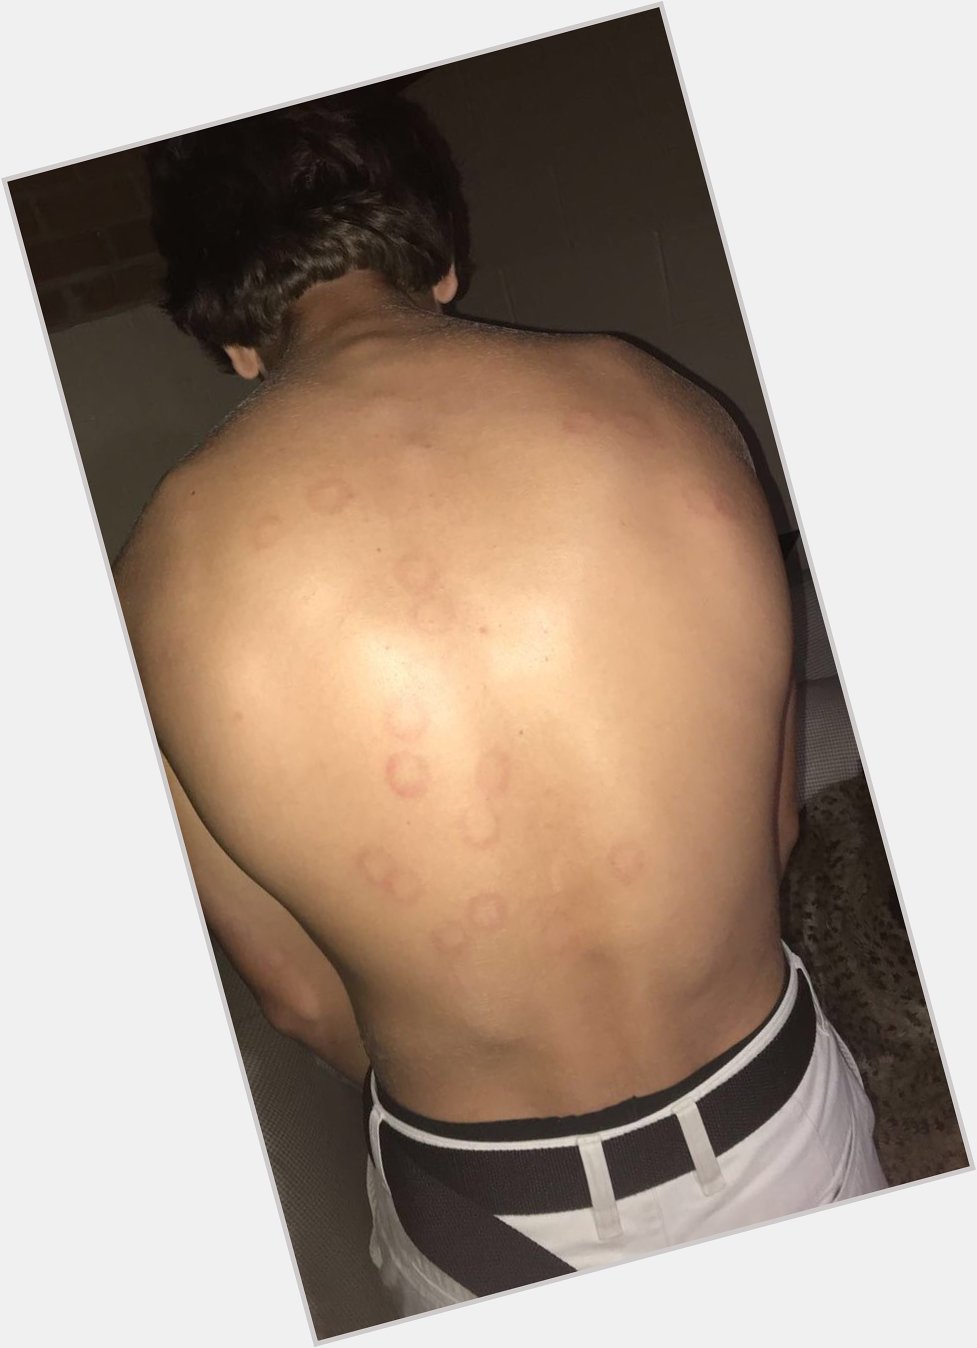 Happy birthday Hope we get some more sting pong games in 